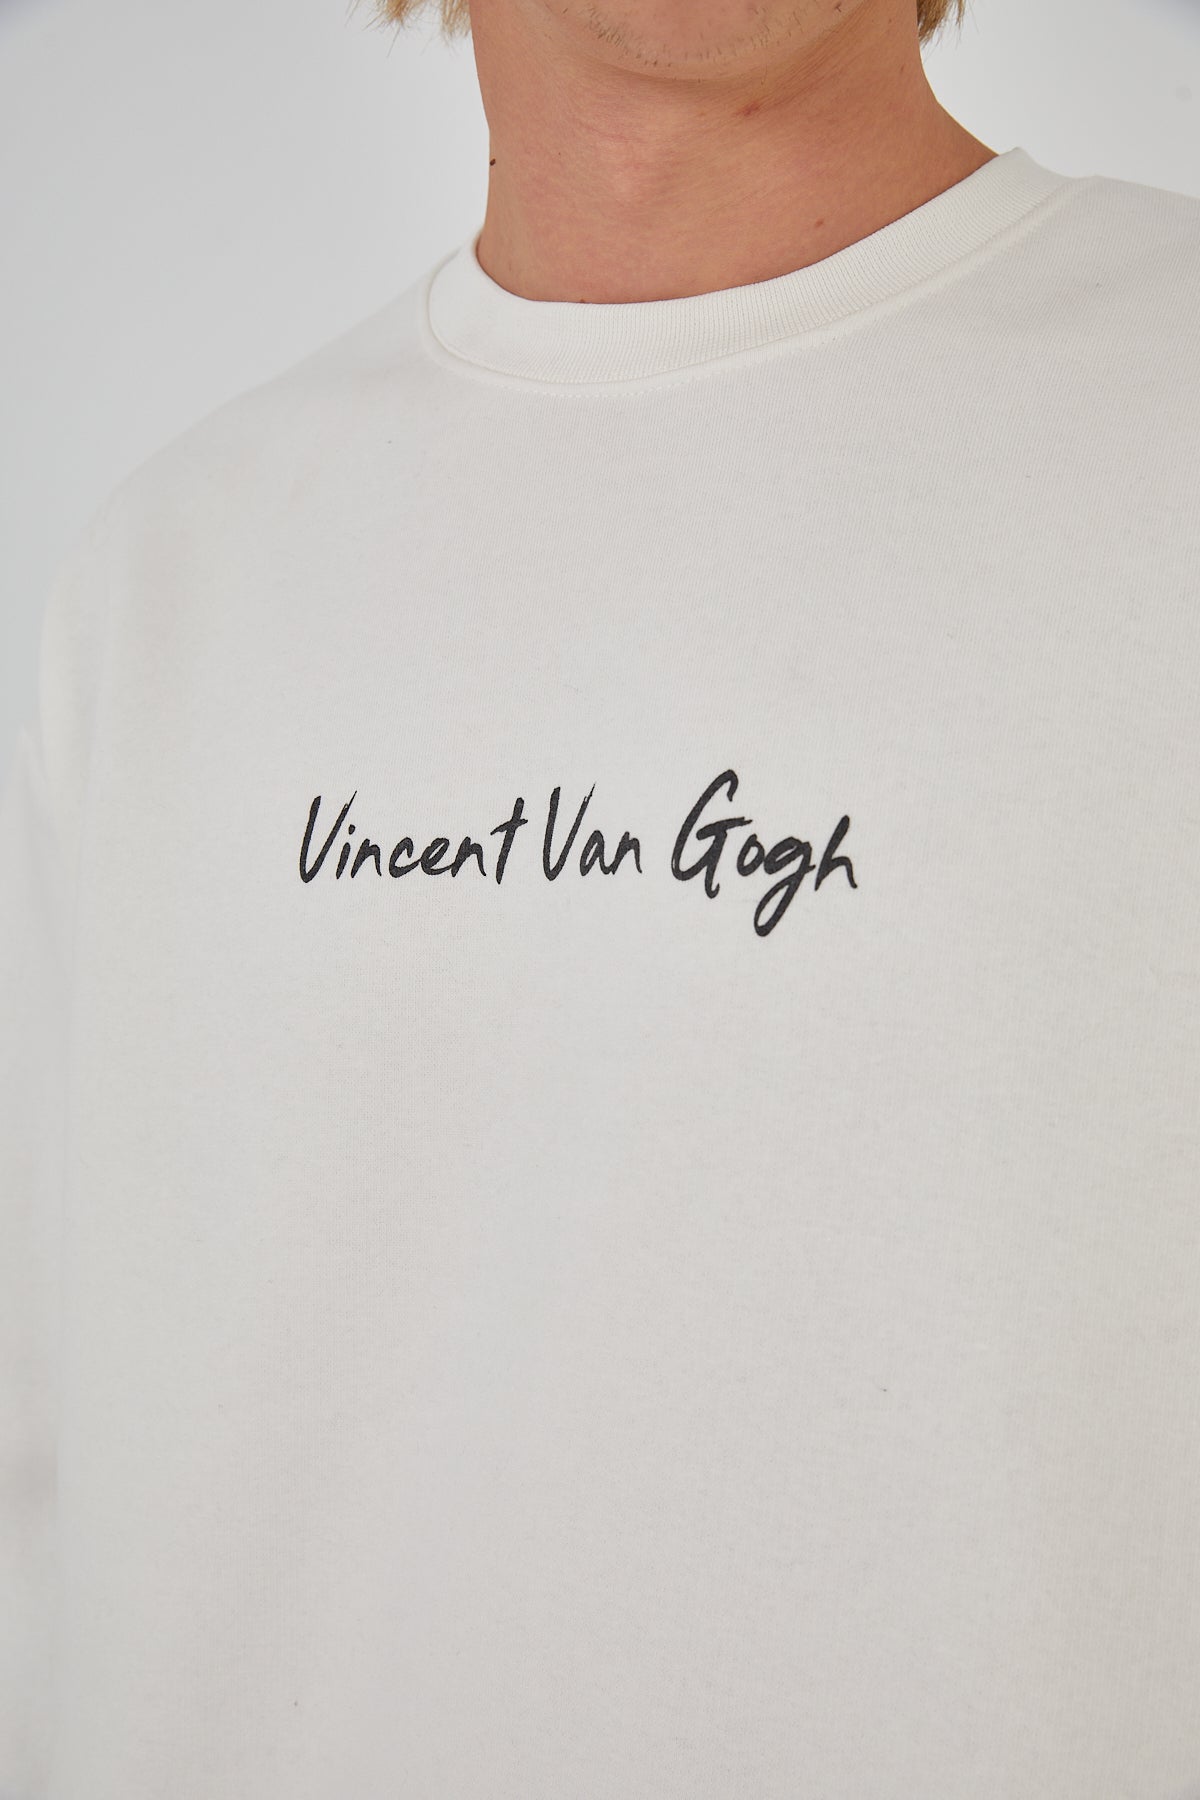 SWEATER - PIECES OF VANGOGH - WHITE - DYS-Amsterdam